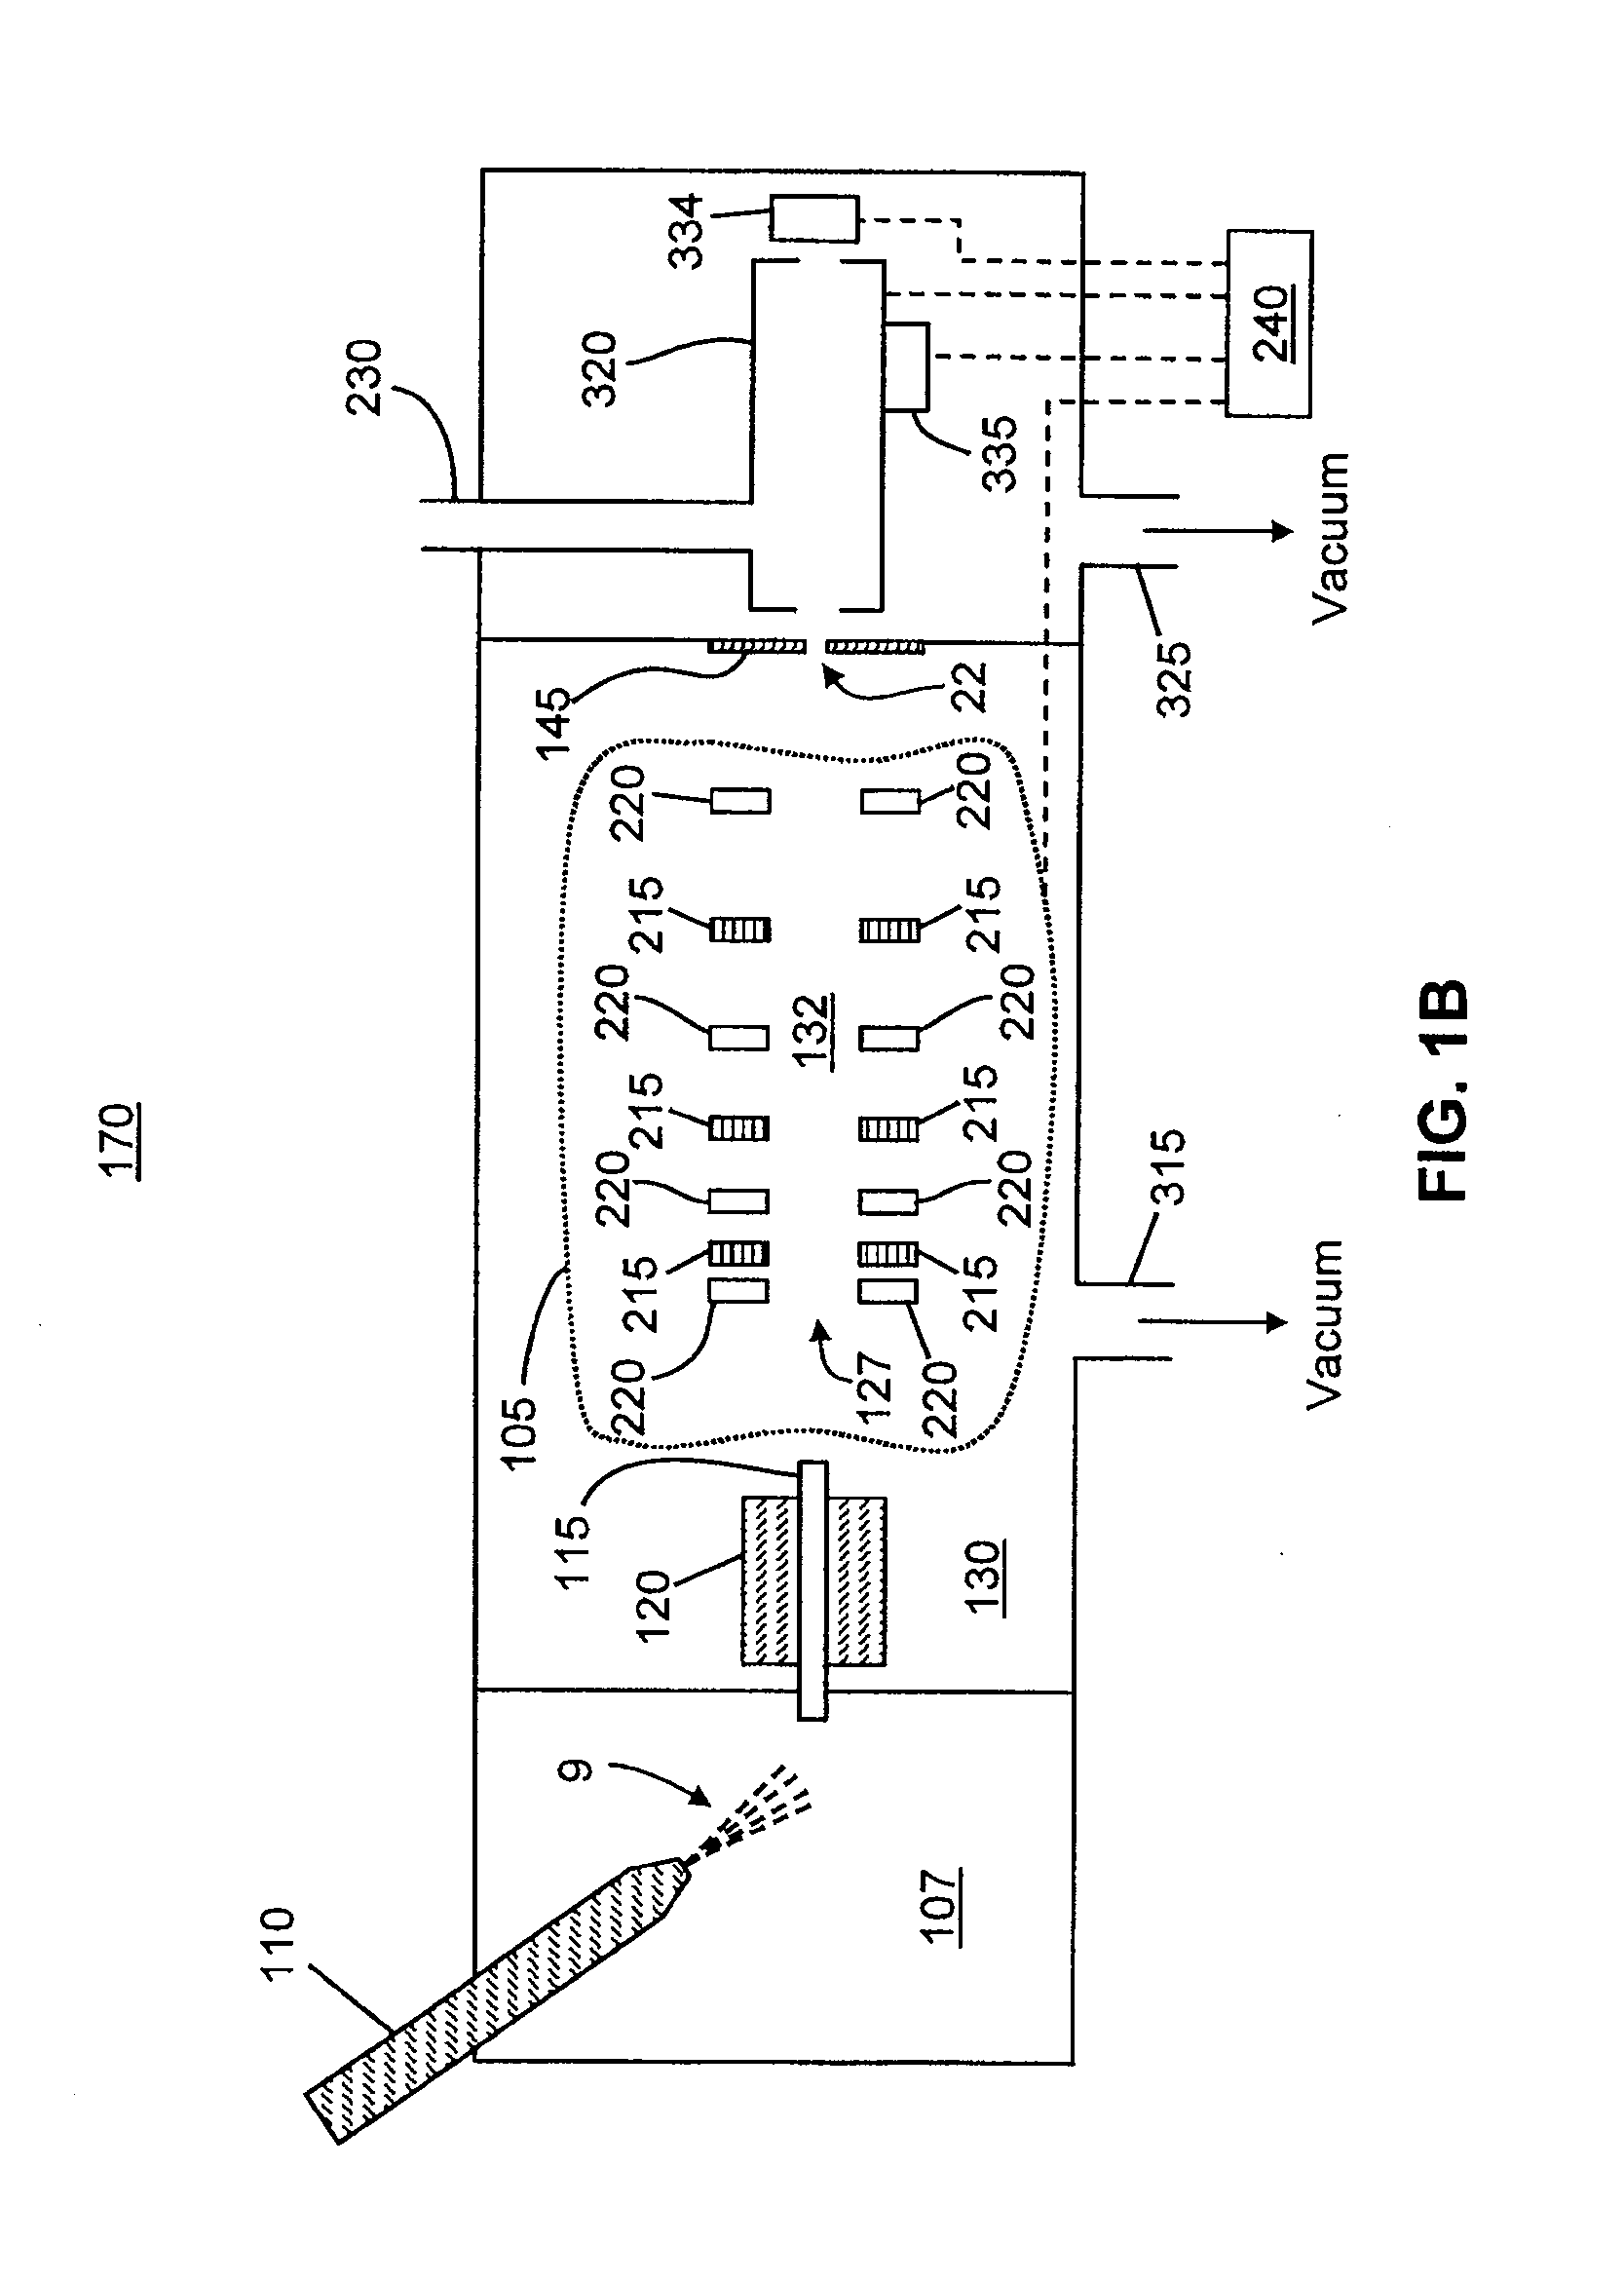 Ion Population Control in a Mass Spectrometer Having Mass-Selective Transfer Optics